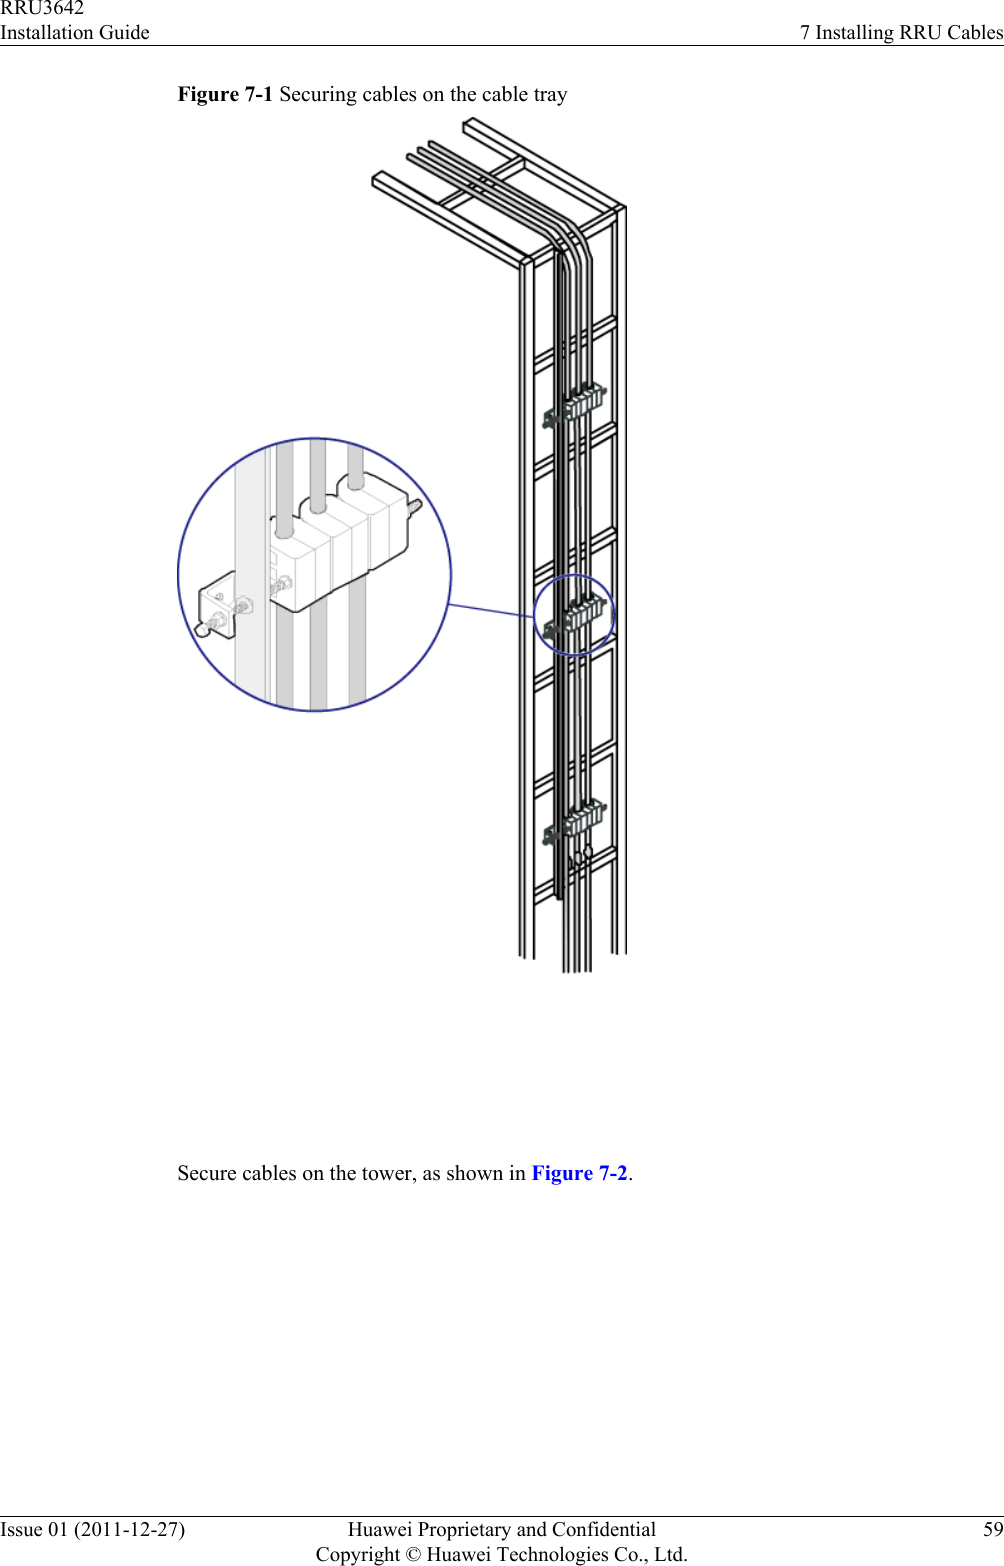 Figure 7-1 Securing cables on the cable tray Secure cables on the tower, as shown in Figure 7-2.RRU3642Installation Guide 7 Installing RRU CablesIssue 01 (2011-12-27) Huawei Proprietary and ConfidentialCopyright © Huawei Technologies Co., Ltd.59